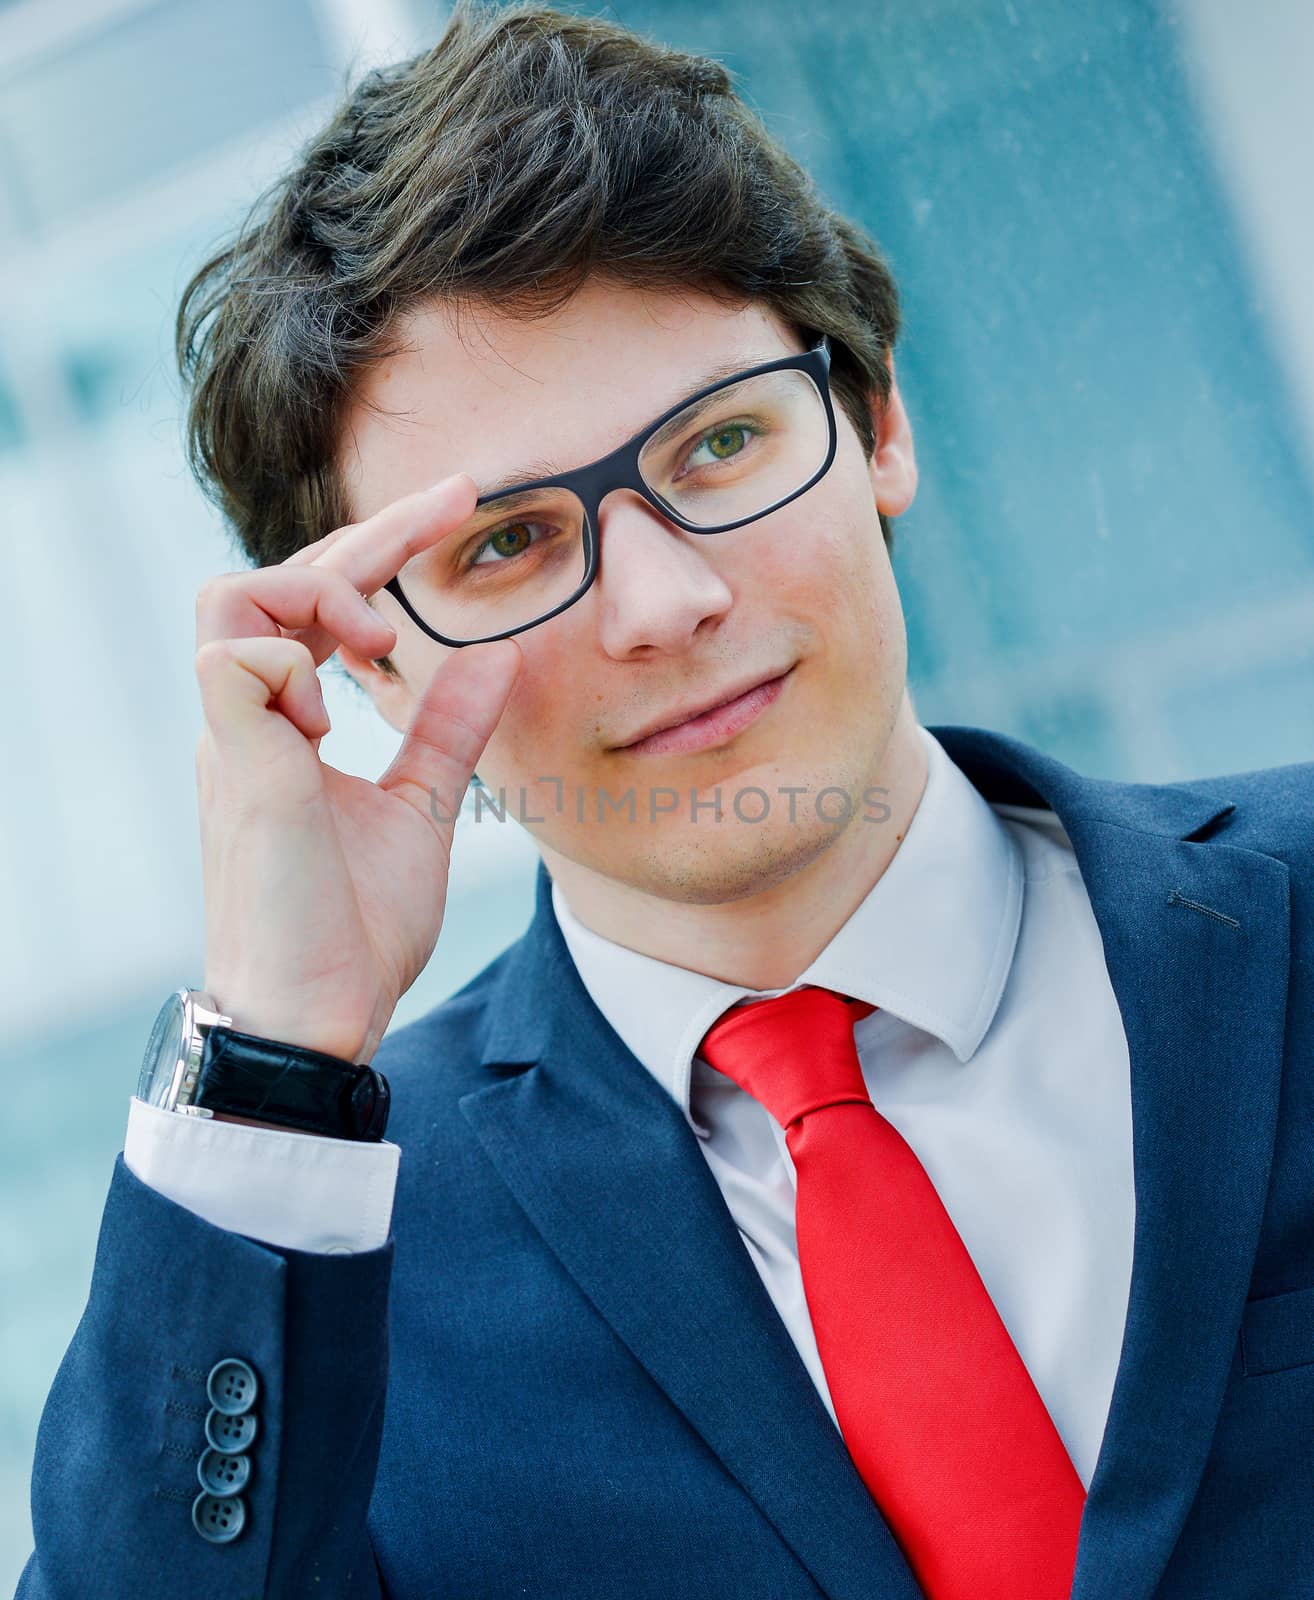 Outdoor expressive portrait of a dynamic junior executive